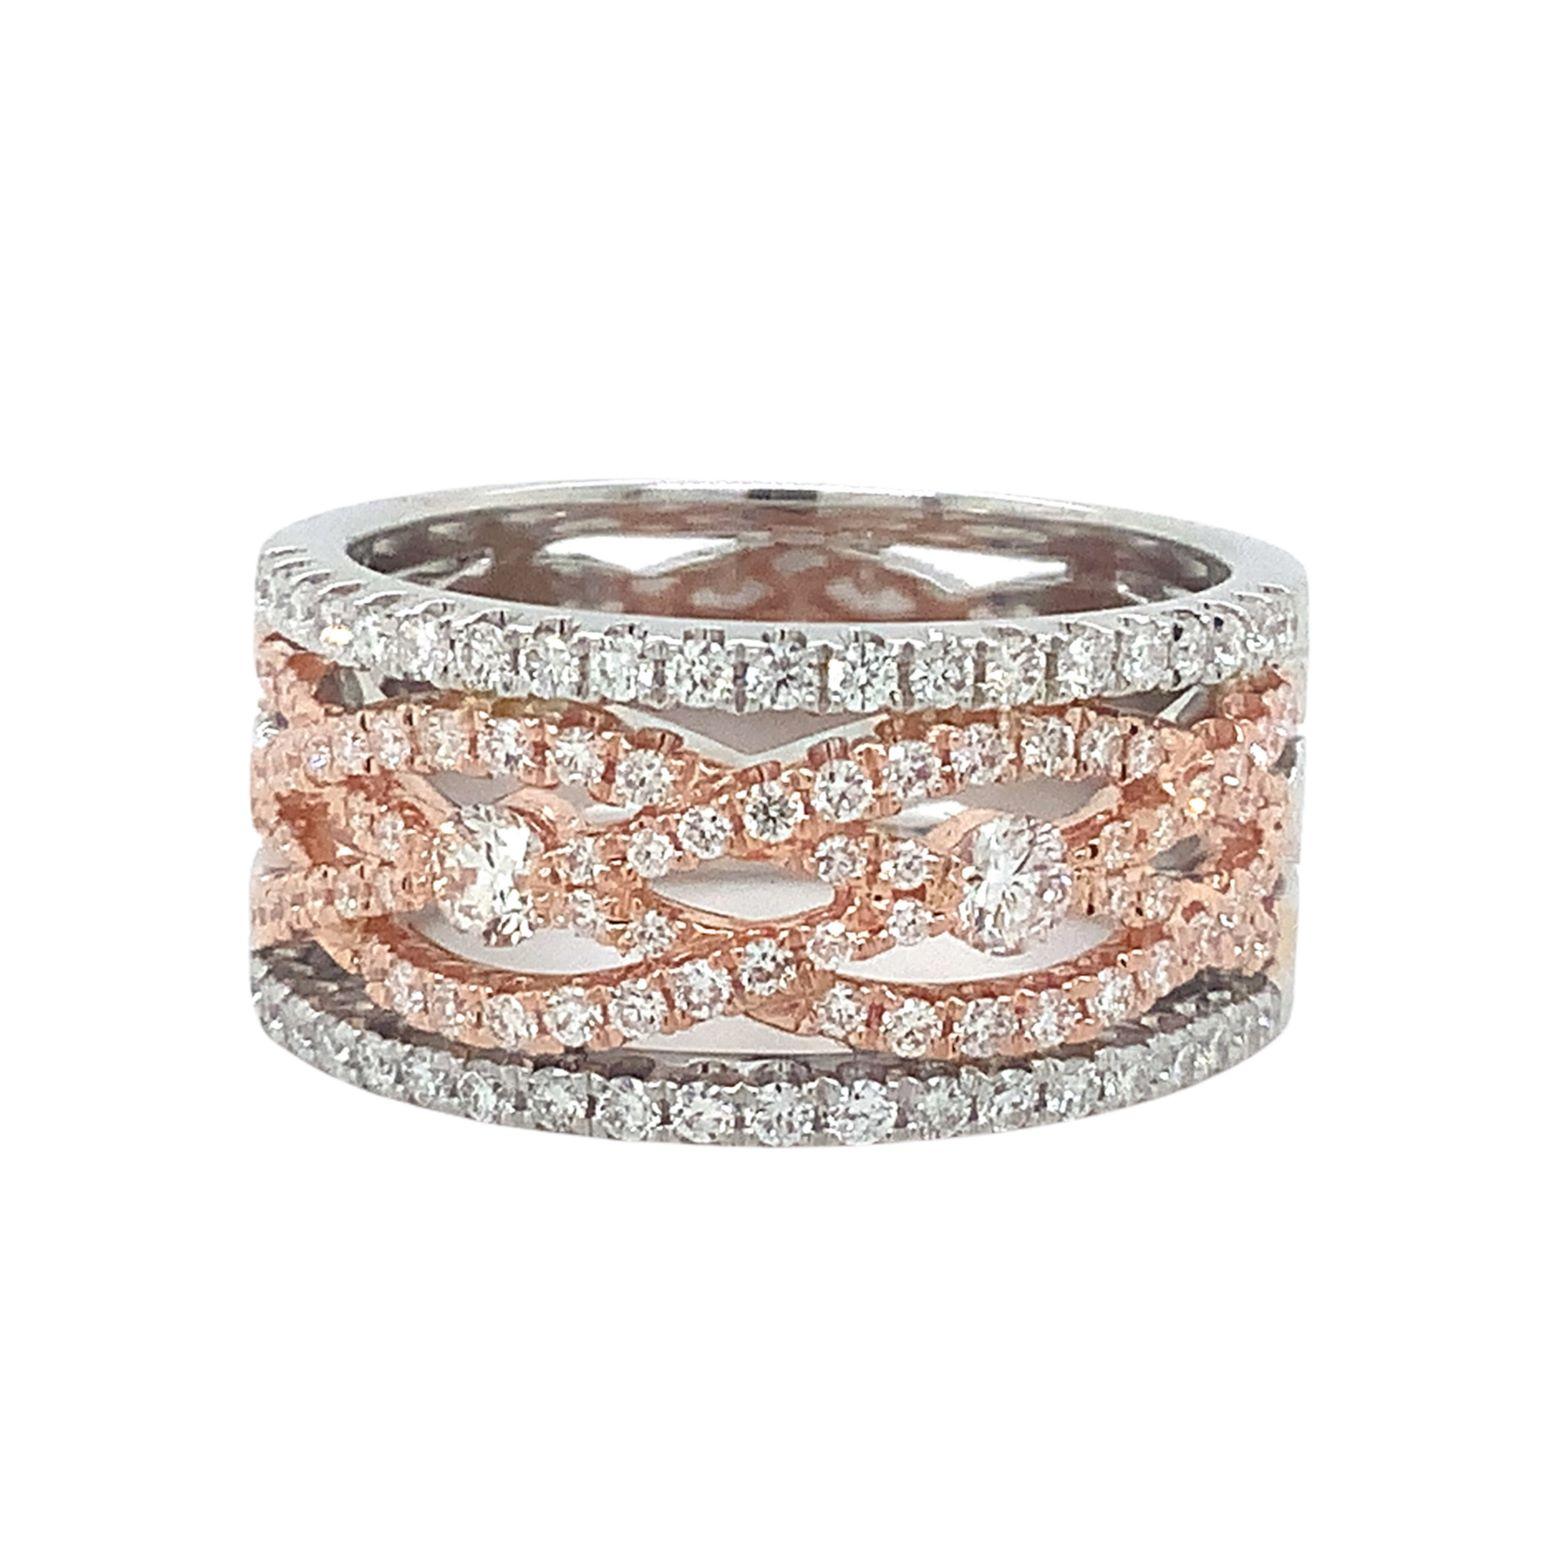 Roman + Jules Pavé White Braided Infinity Diamond Band Set in 14 Karat Rose Gold and White Gold. This Wide Band Design showcases the intricacy of the negative space that this braided infinity design highlights.
108 Round Brilliant Cut Diamonds equal